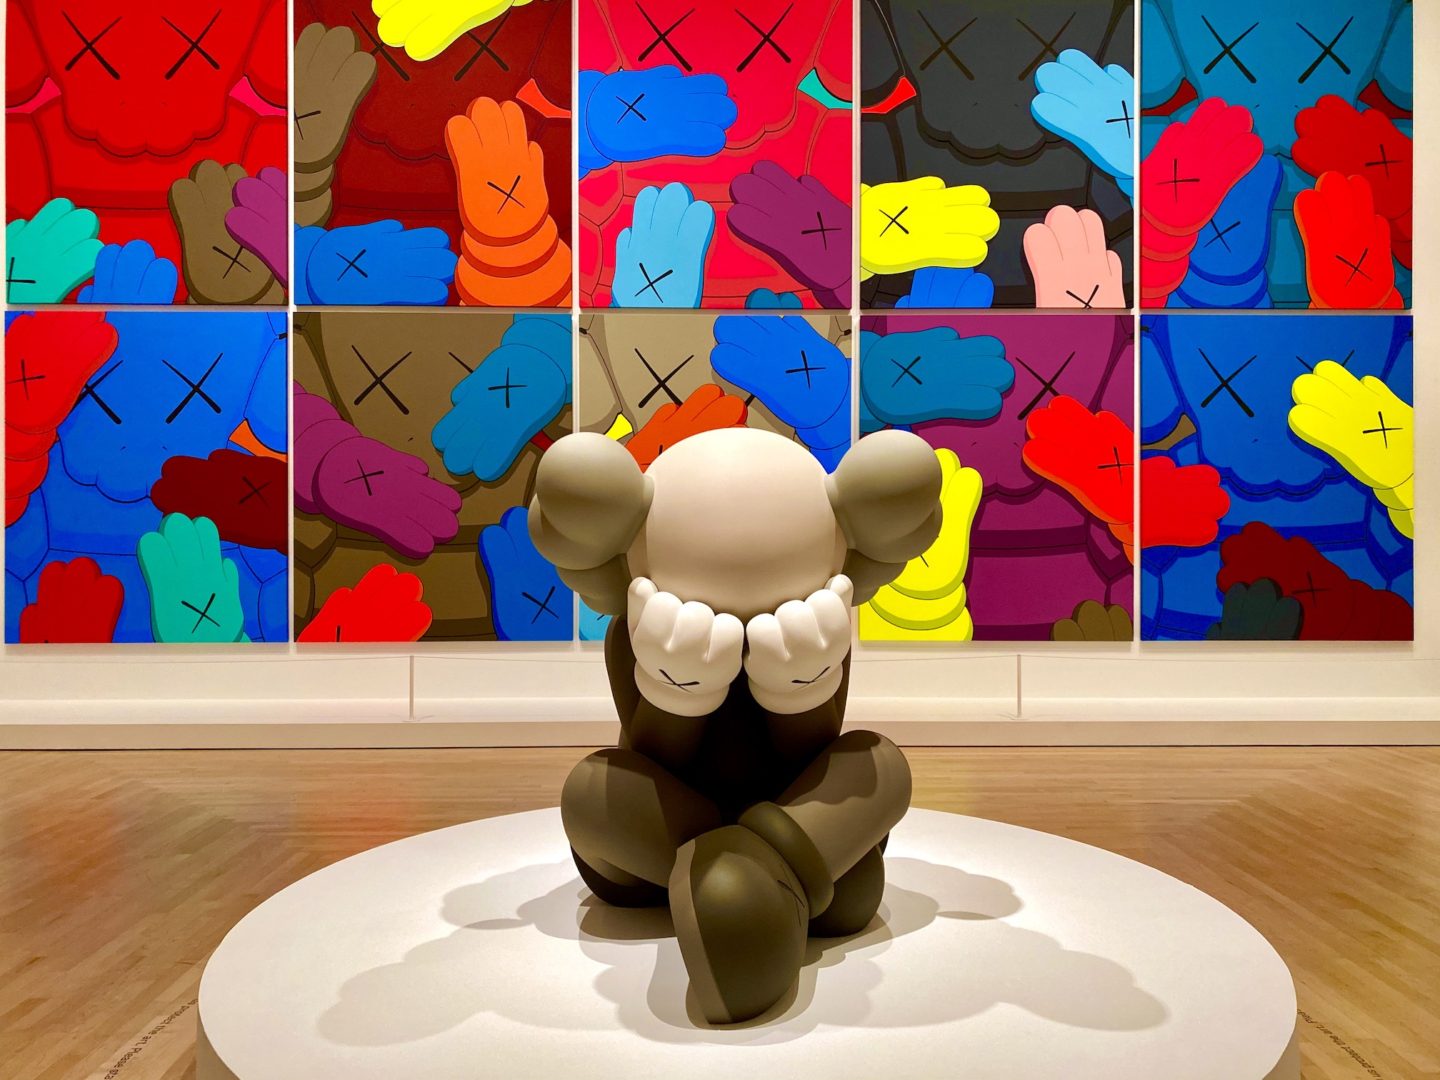 KAWS Brooklyn Museum WHAT PARTY Keyring OrangeKAWS Brooklyn Museum WHAT  PARTY Keyring Orange - OFour